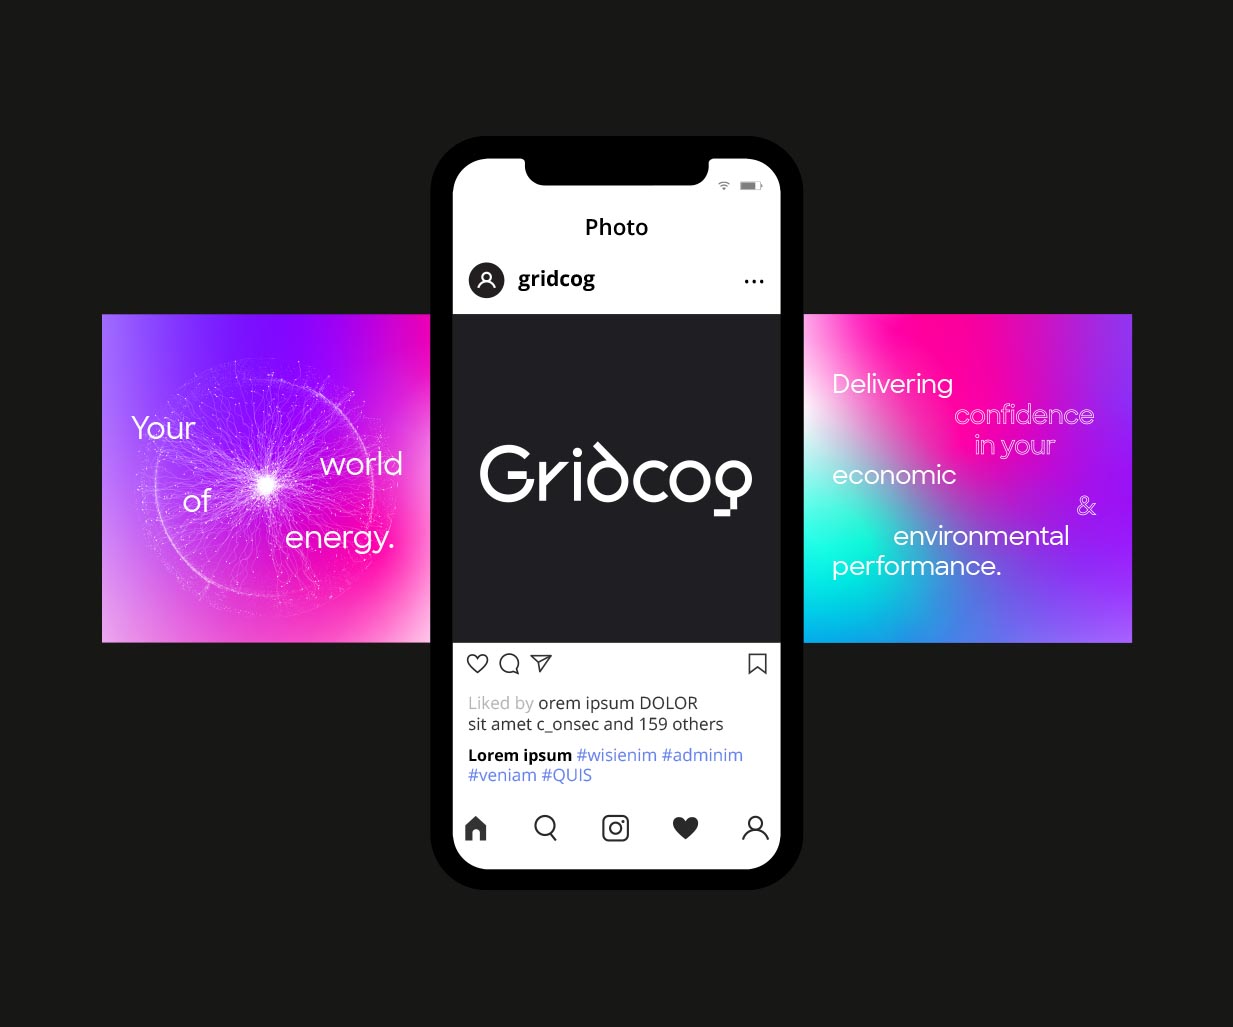 Rebrand for Australian tech company, featuring Brand Positioning, Brand Identity and Digital Branding. Created by the Brand Designers of Percept, image J